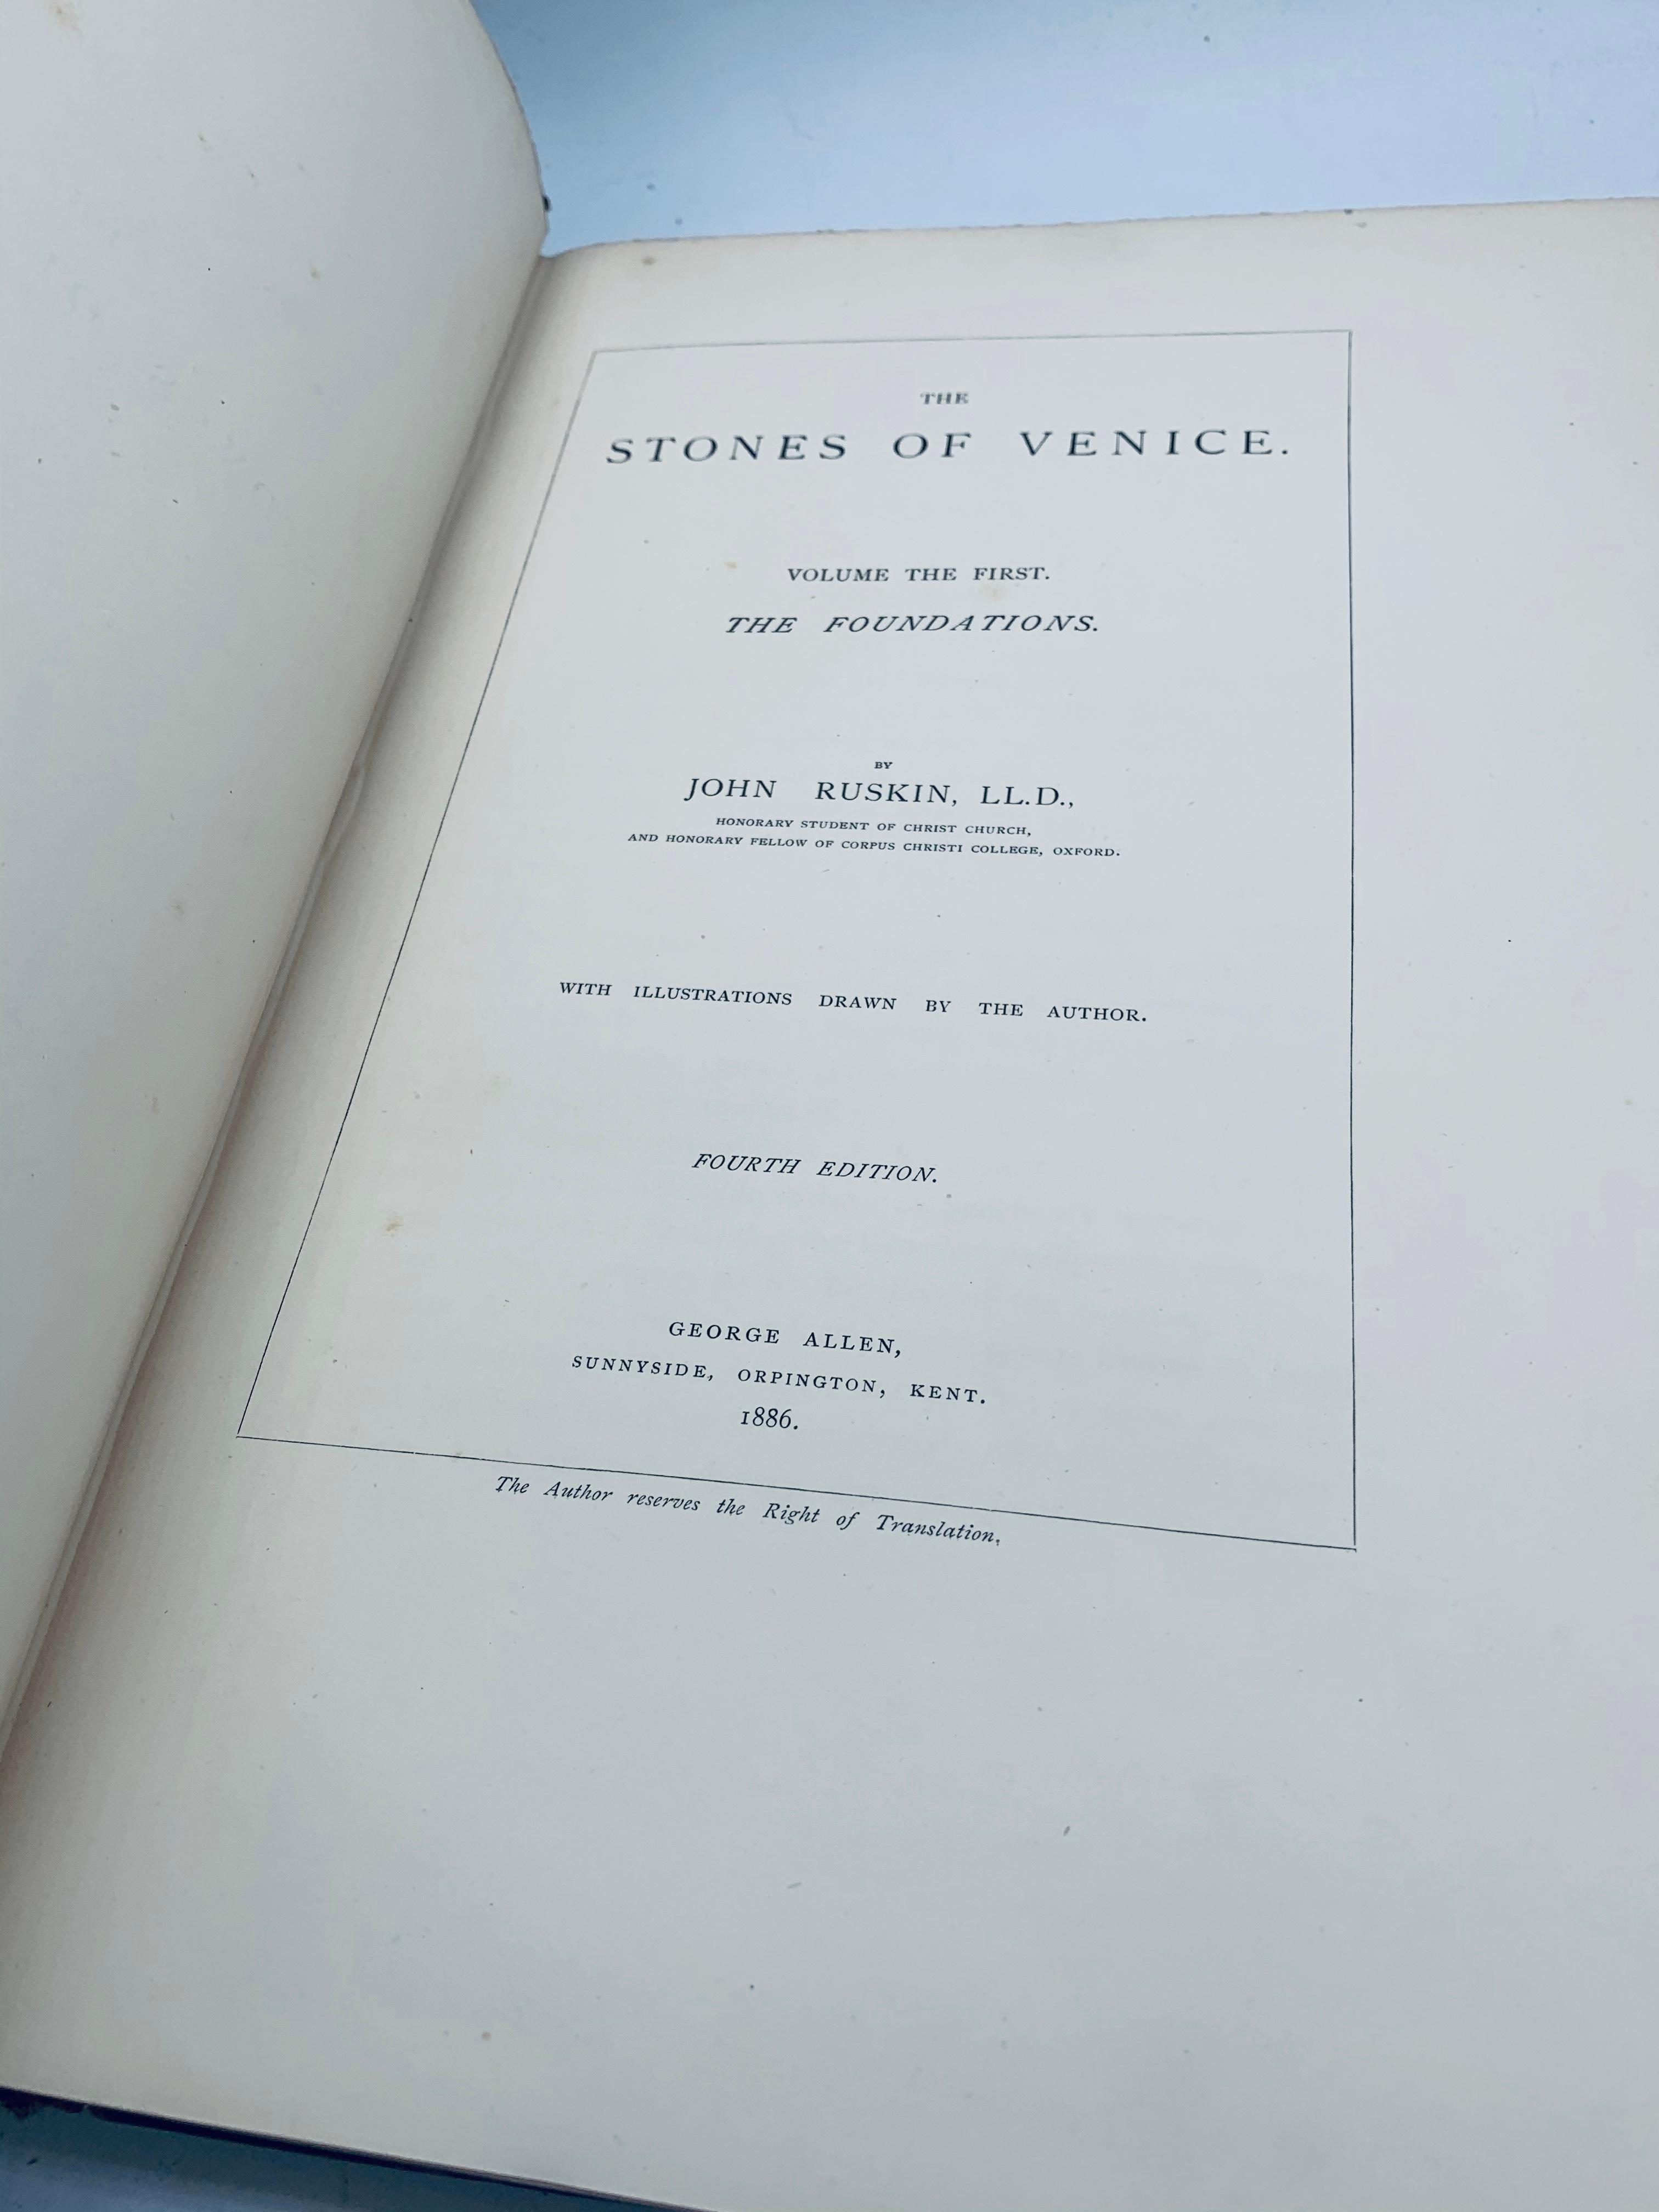 RARE The Stones of Venice: Large Paper Edition by John Ruskin (1886) THREE VOLUMES